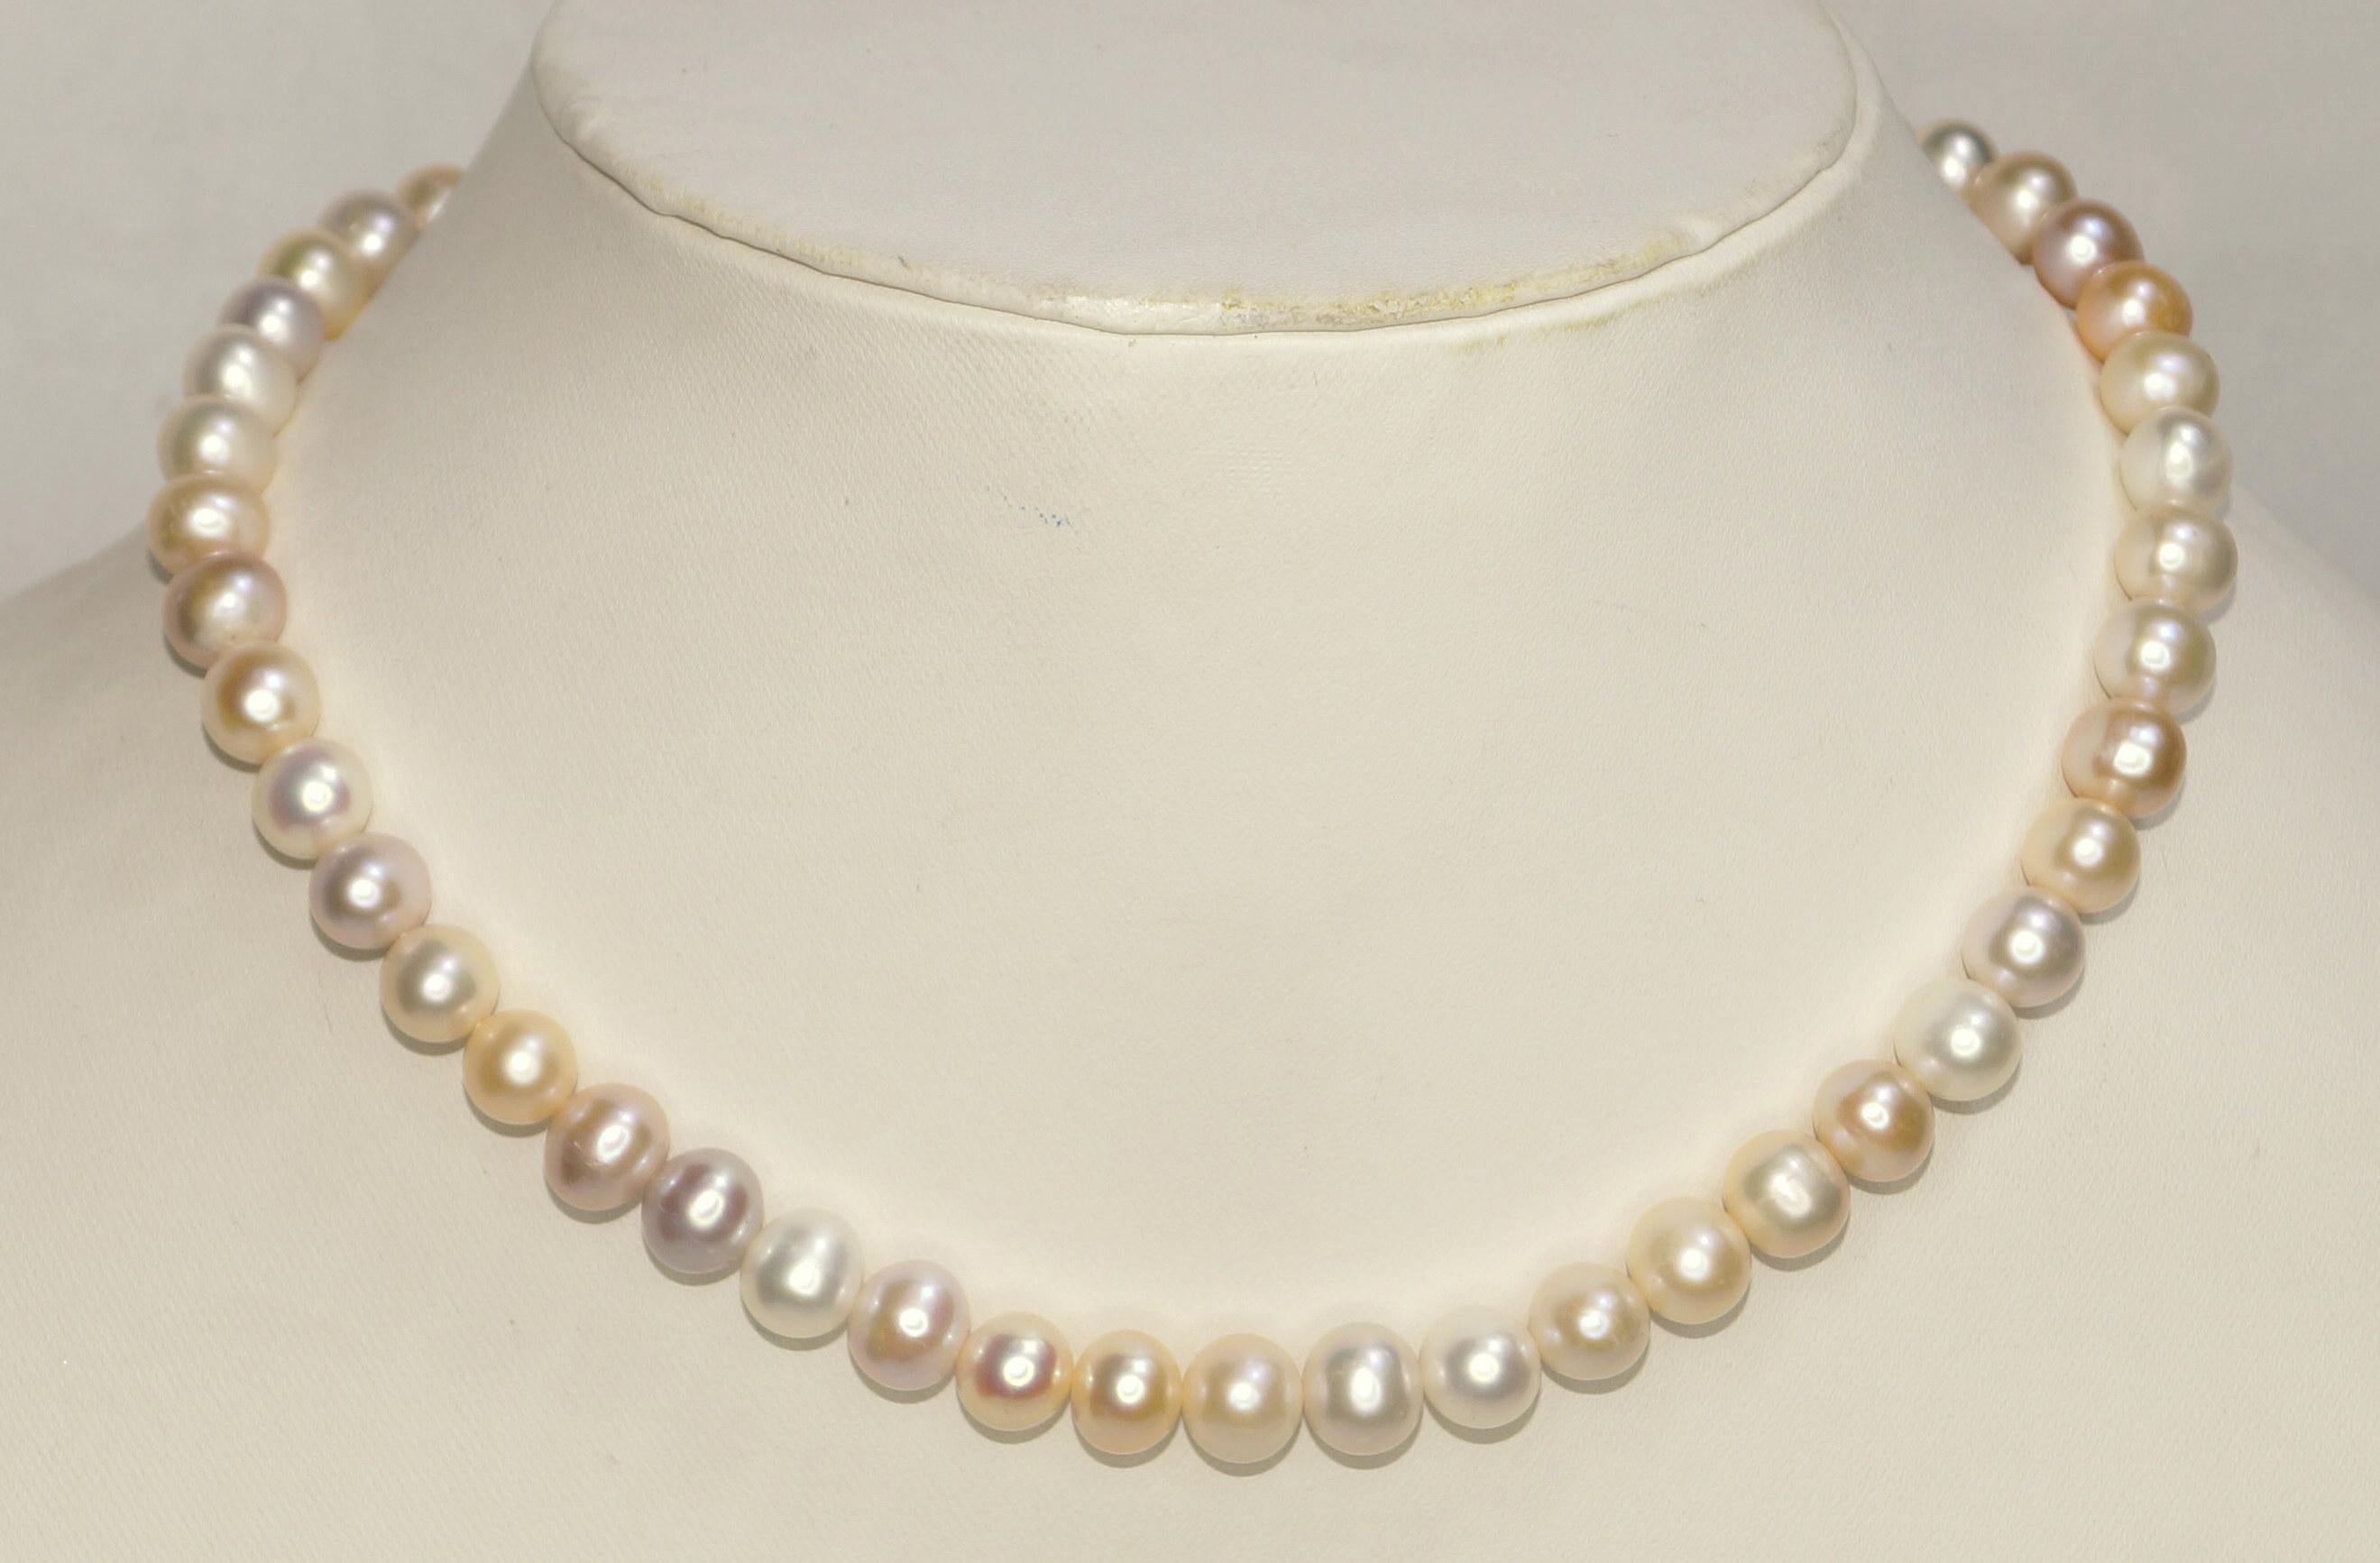 Bead 14k Gold Golden Cream mix Pearl necklace 14mm Freshwater Round Pearl necklace